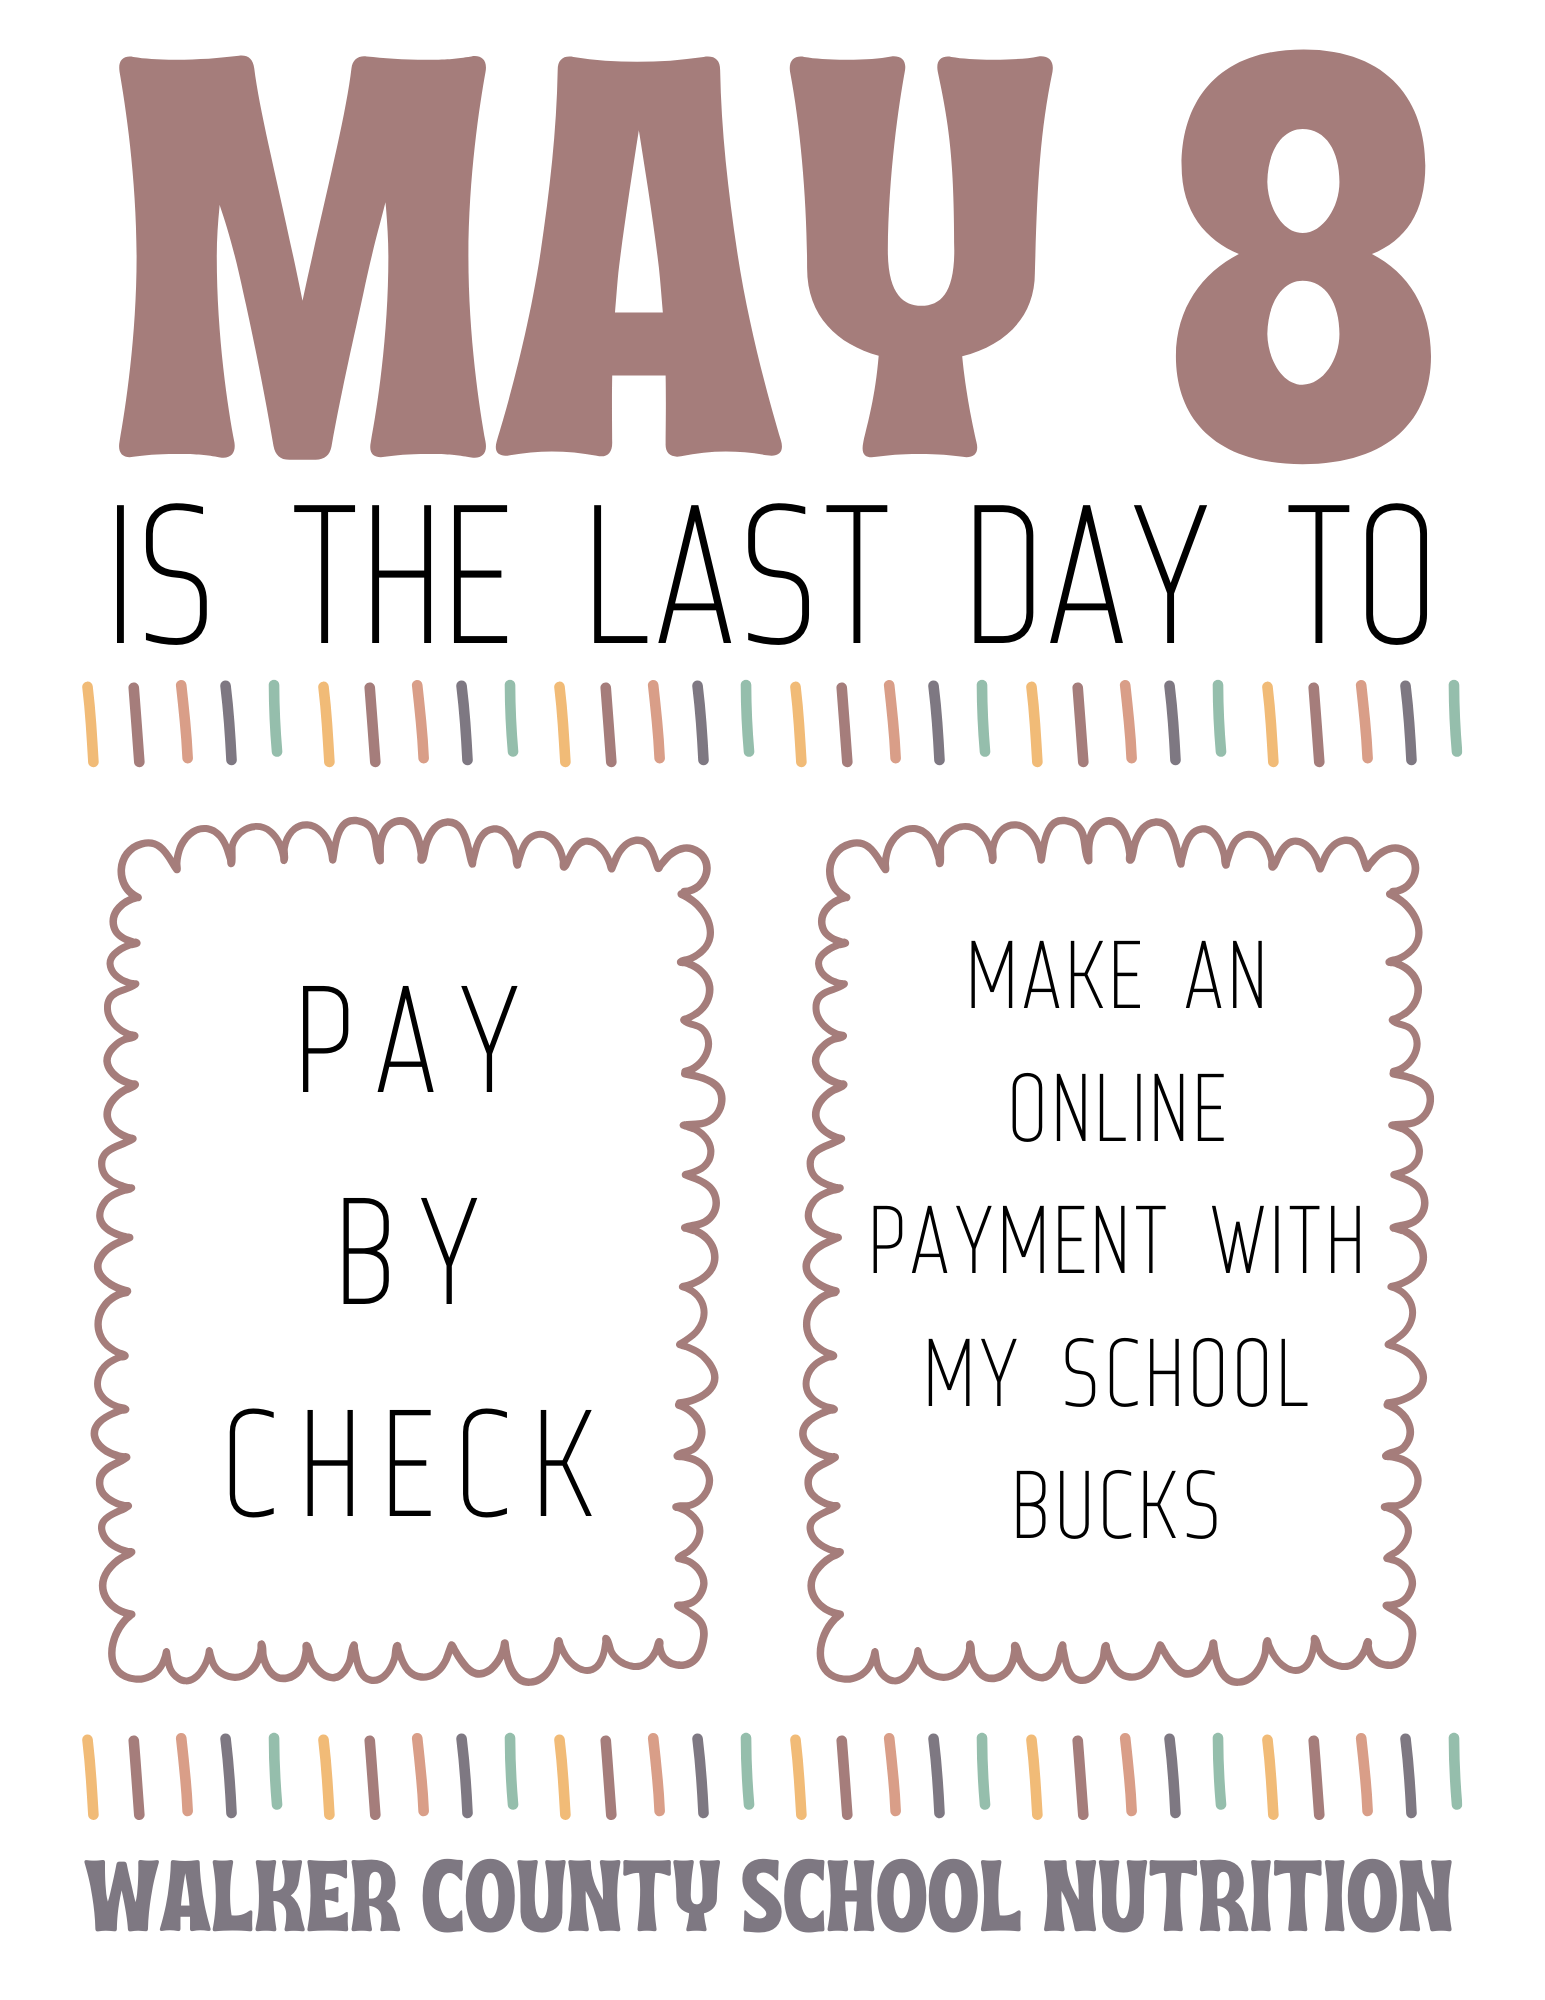 Image Detailing Check and Online Payment Cutoff Date of May 8